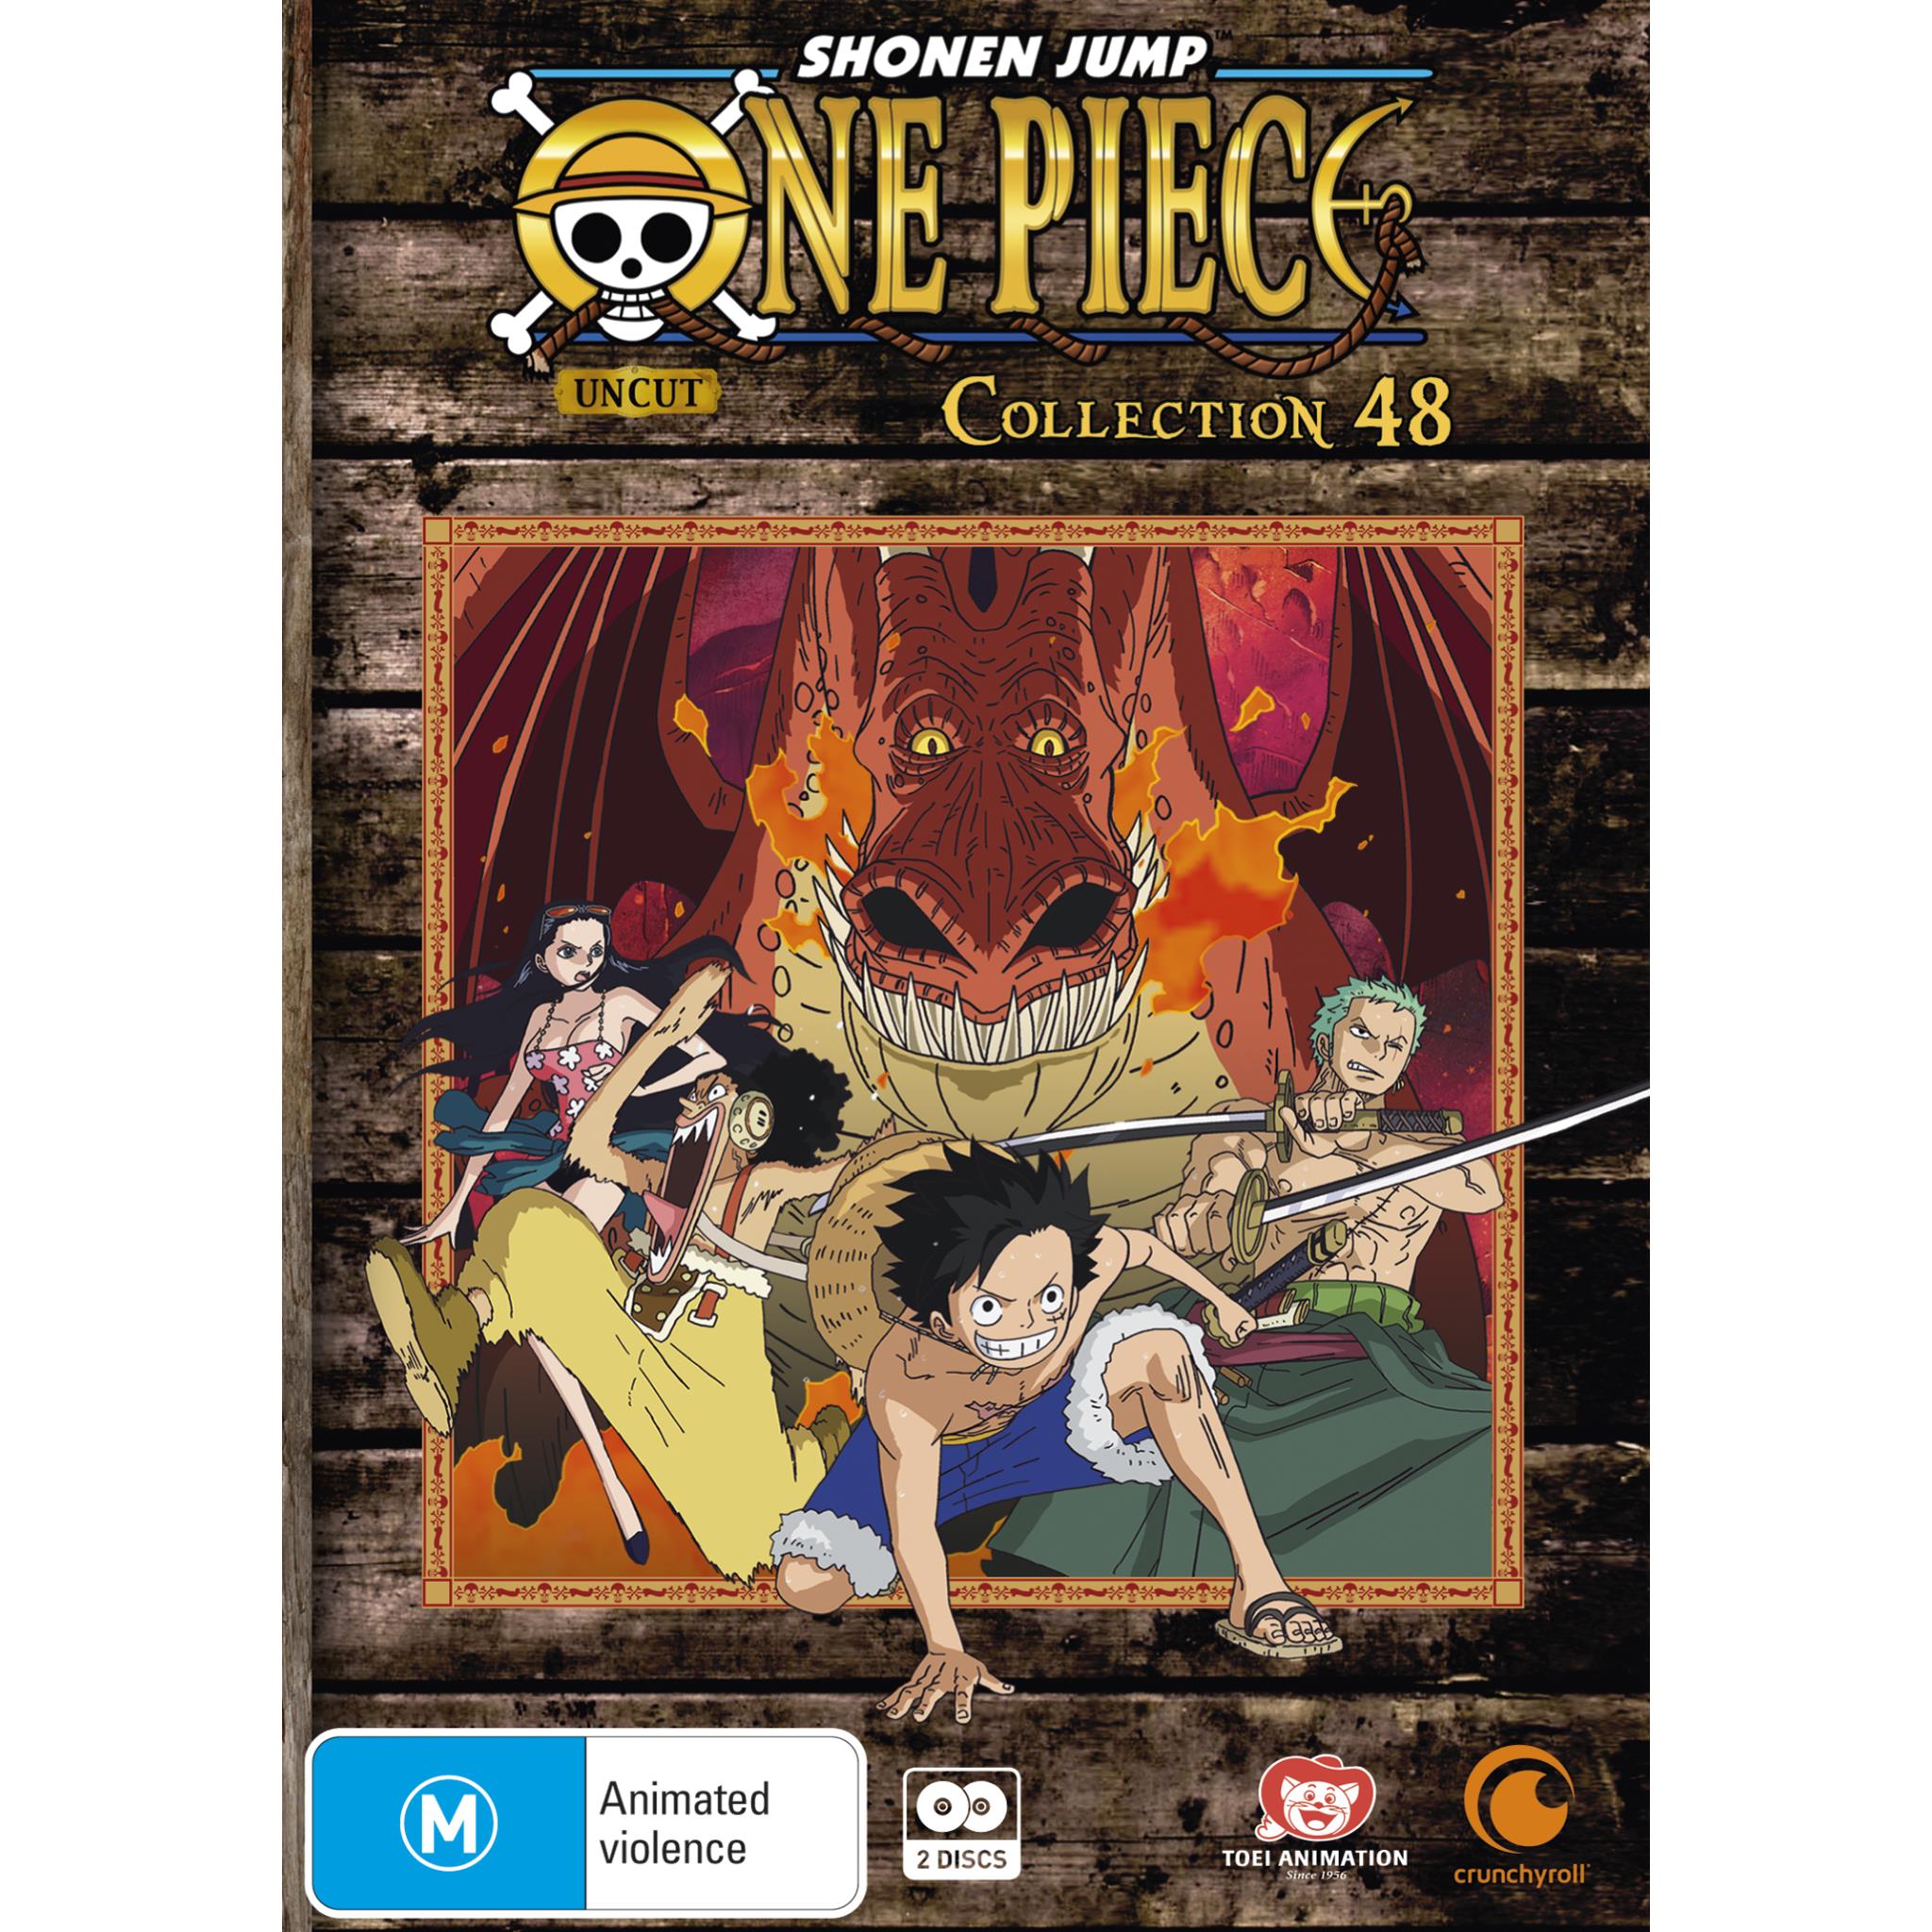 One Piece Collection 1 (Episodes 1-26) [DVD]